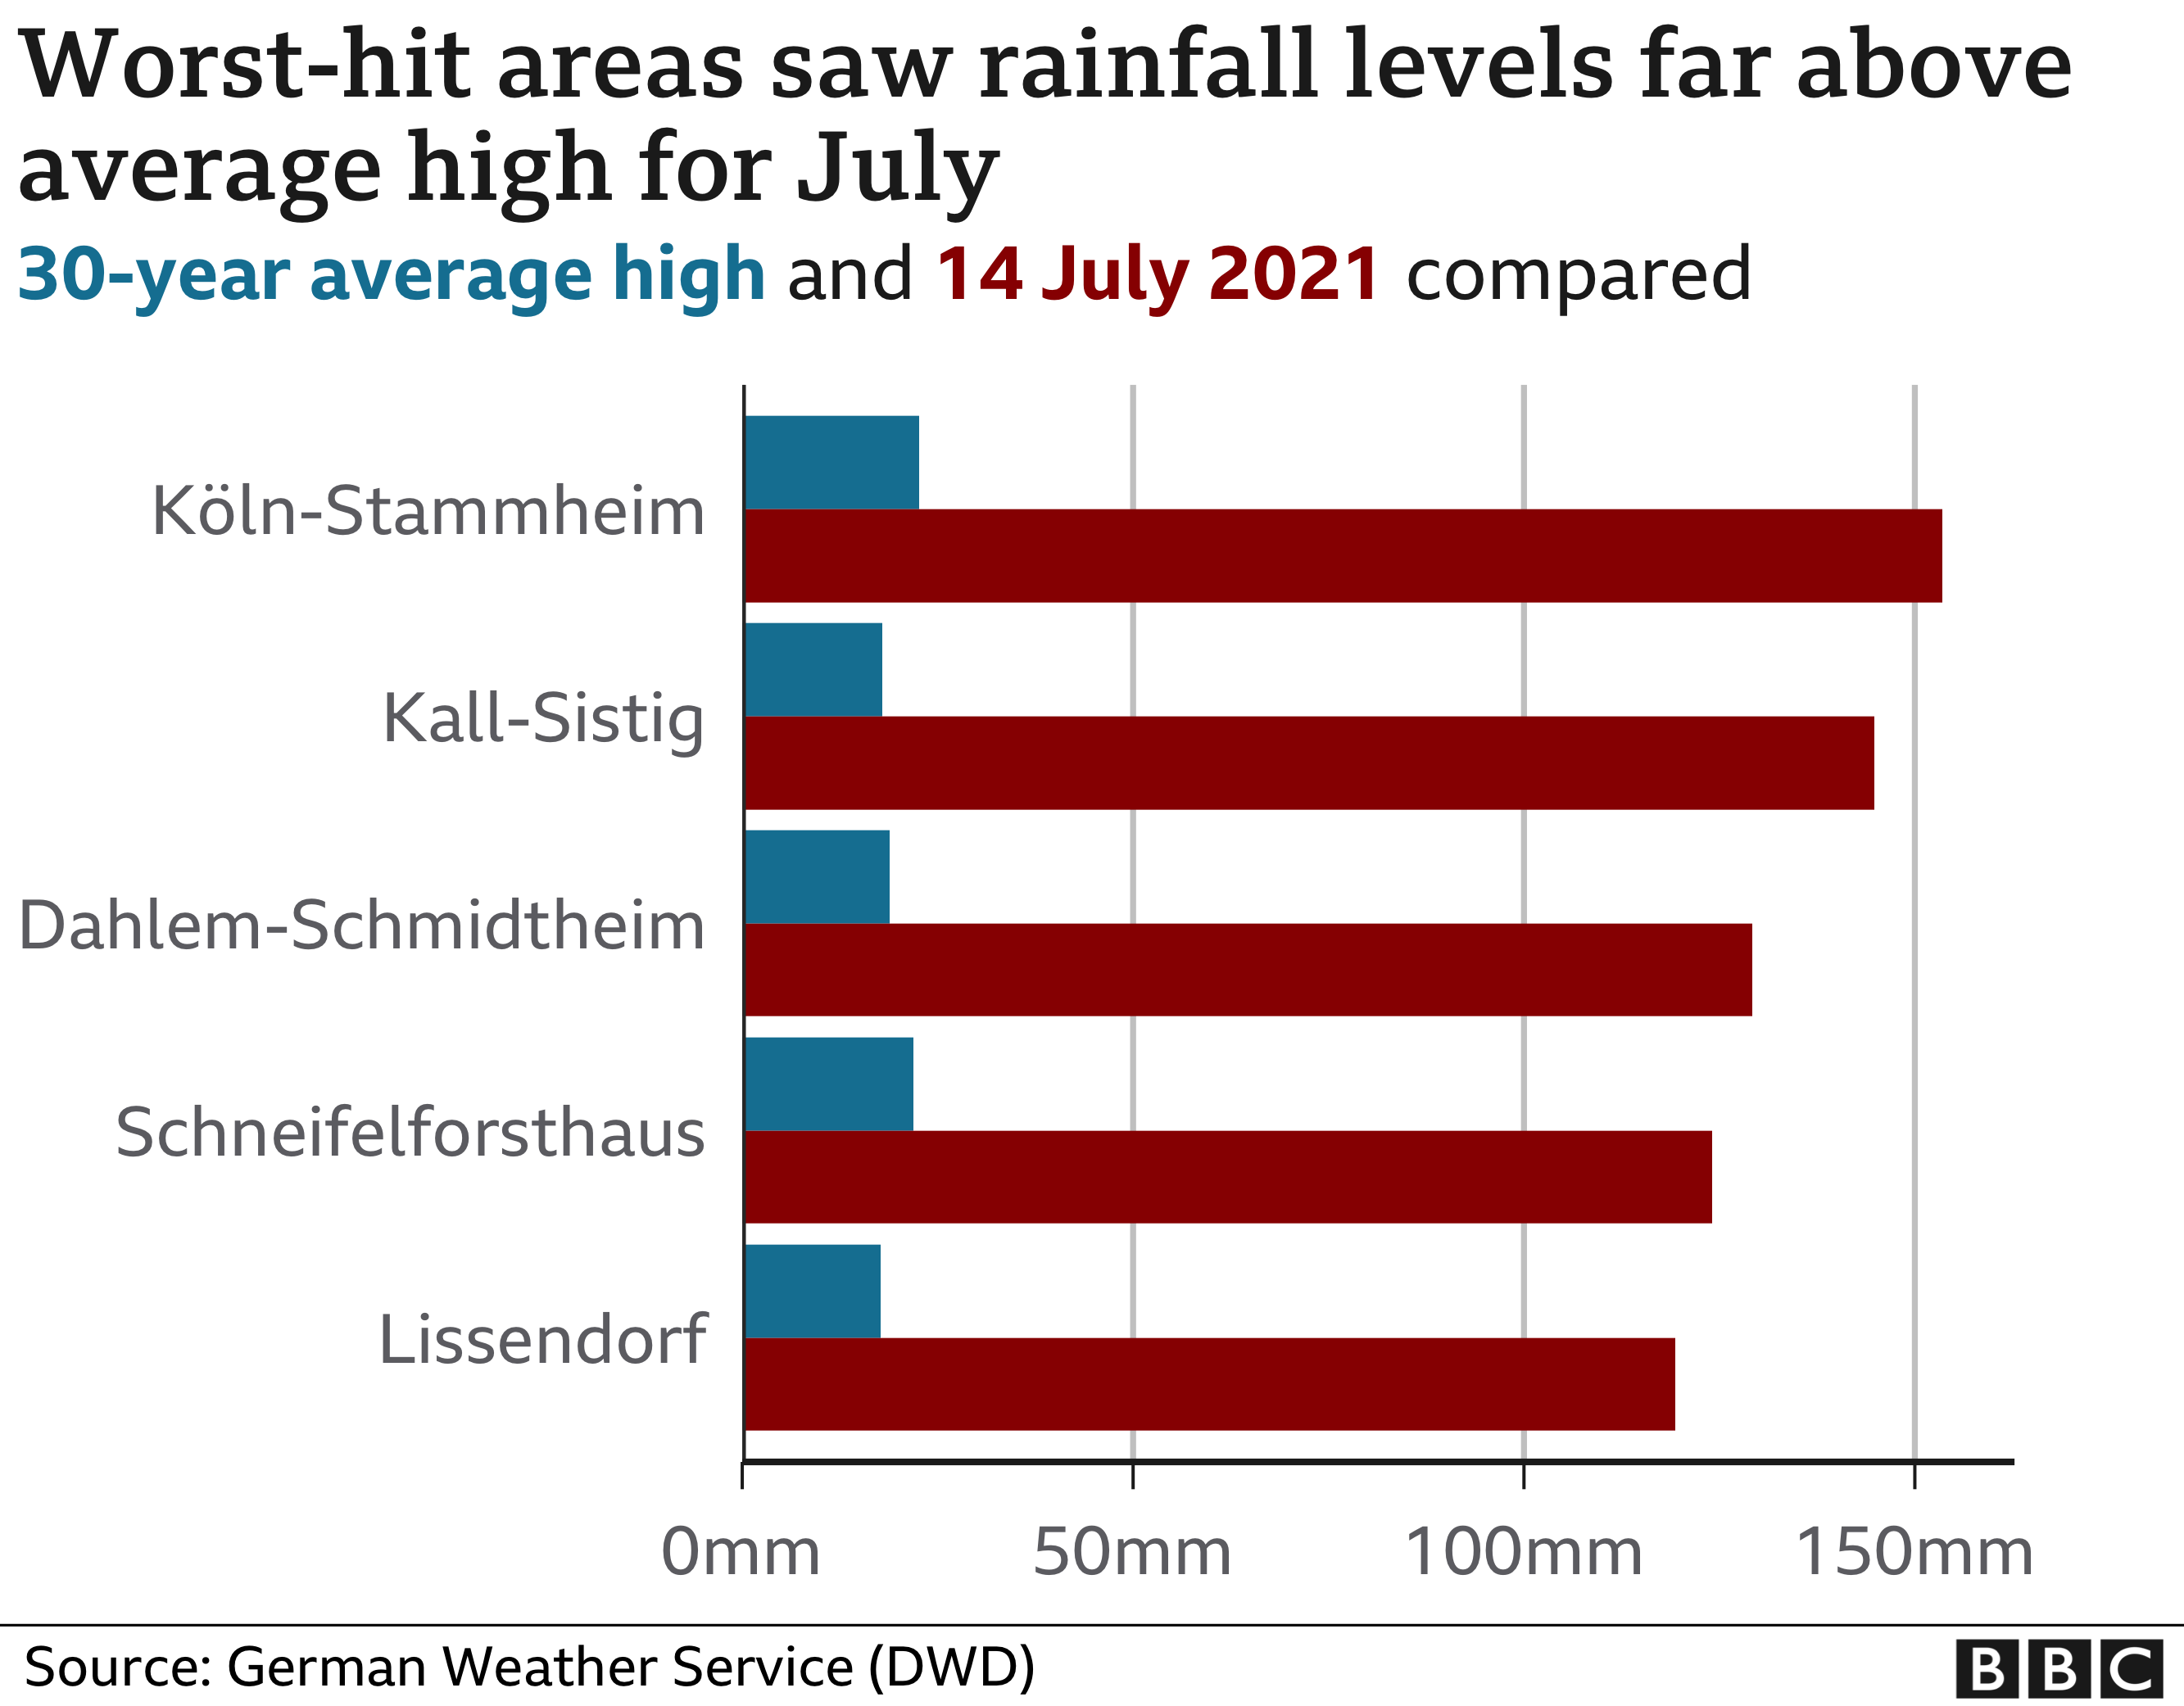 Chart showing rainfall levels for worst-hit areas on 14 July compared with the 30-year average high